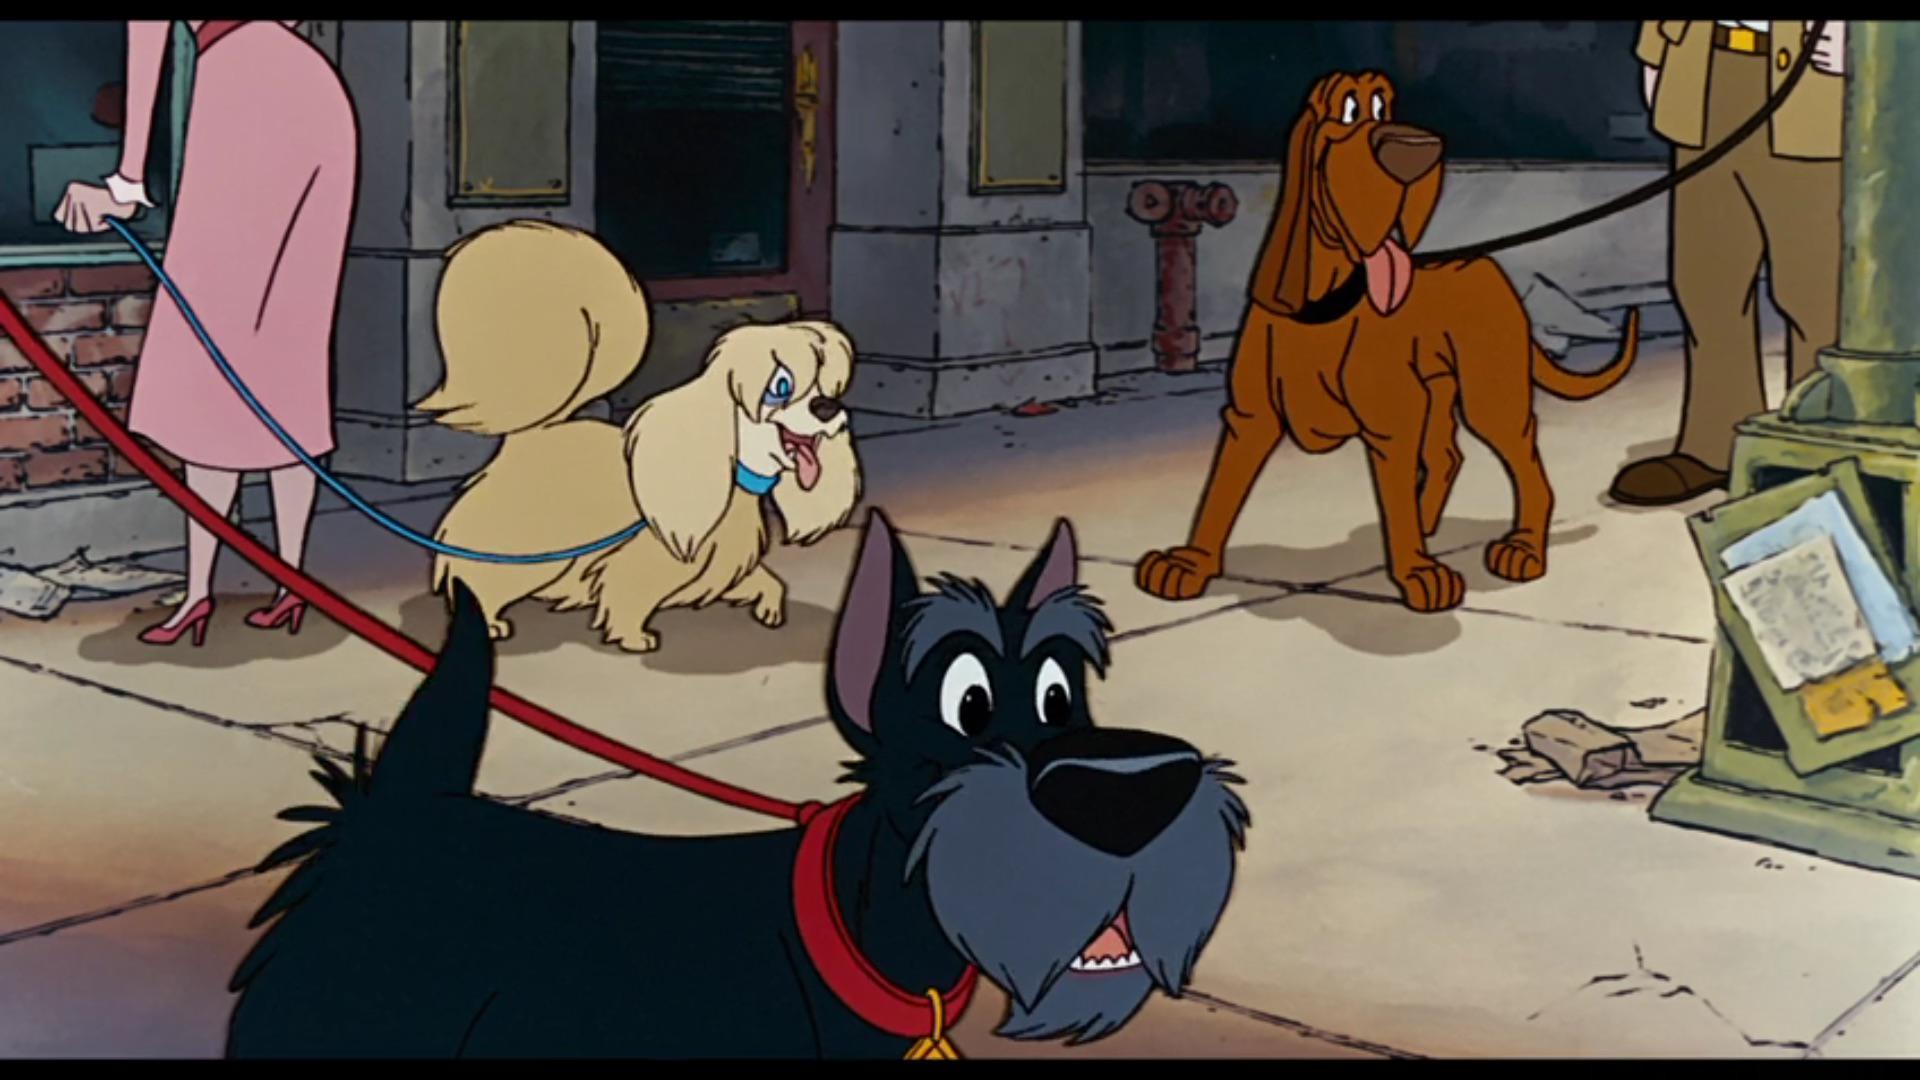 In Disney's Oliver & Company (1988), shortly after the two meet, Dodger is singing and leading Oliver through New York. For a second you can see Jock, Trusty and Peg from Disney's